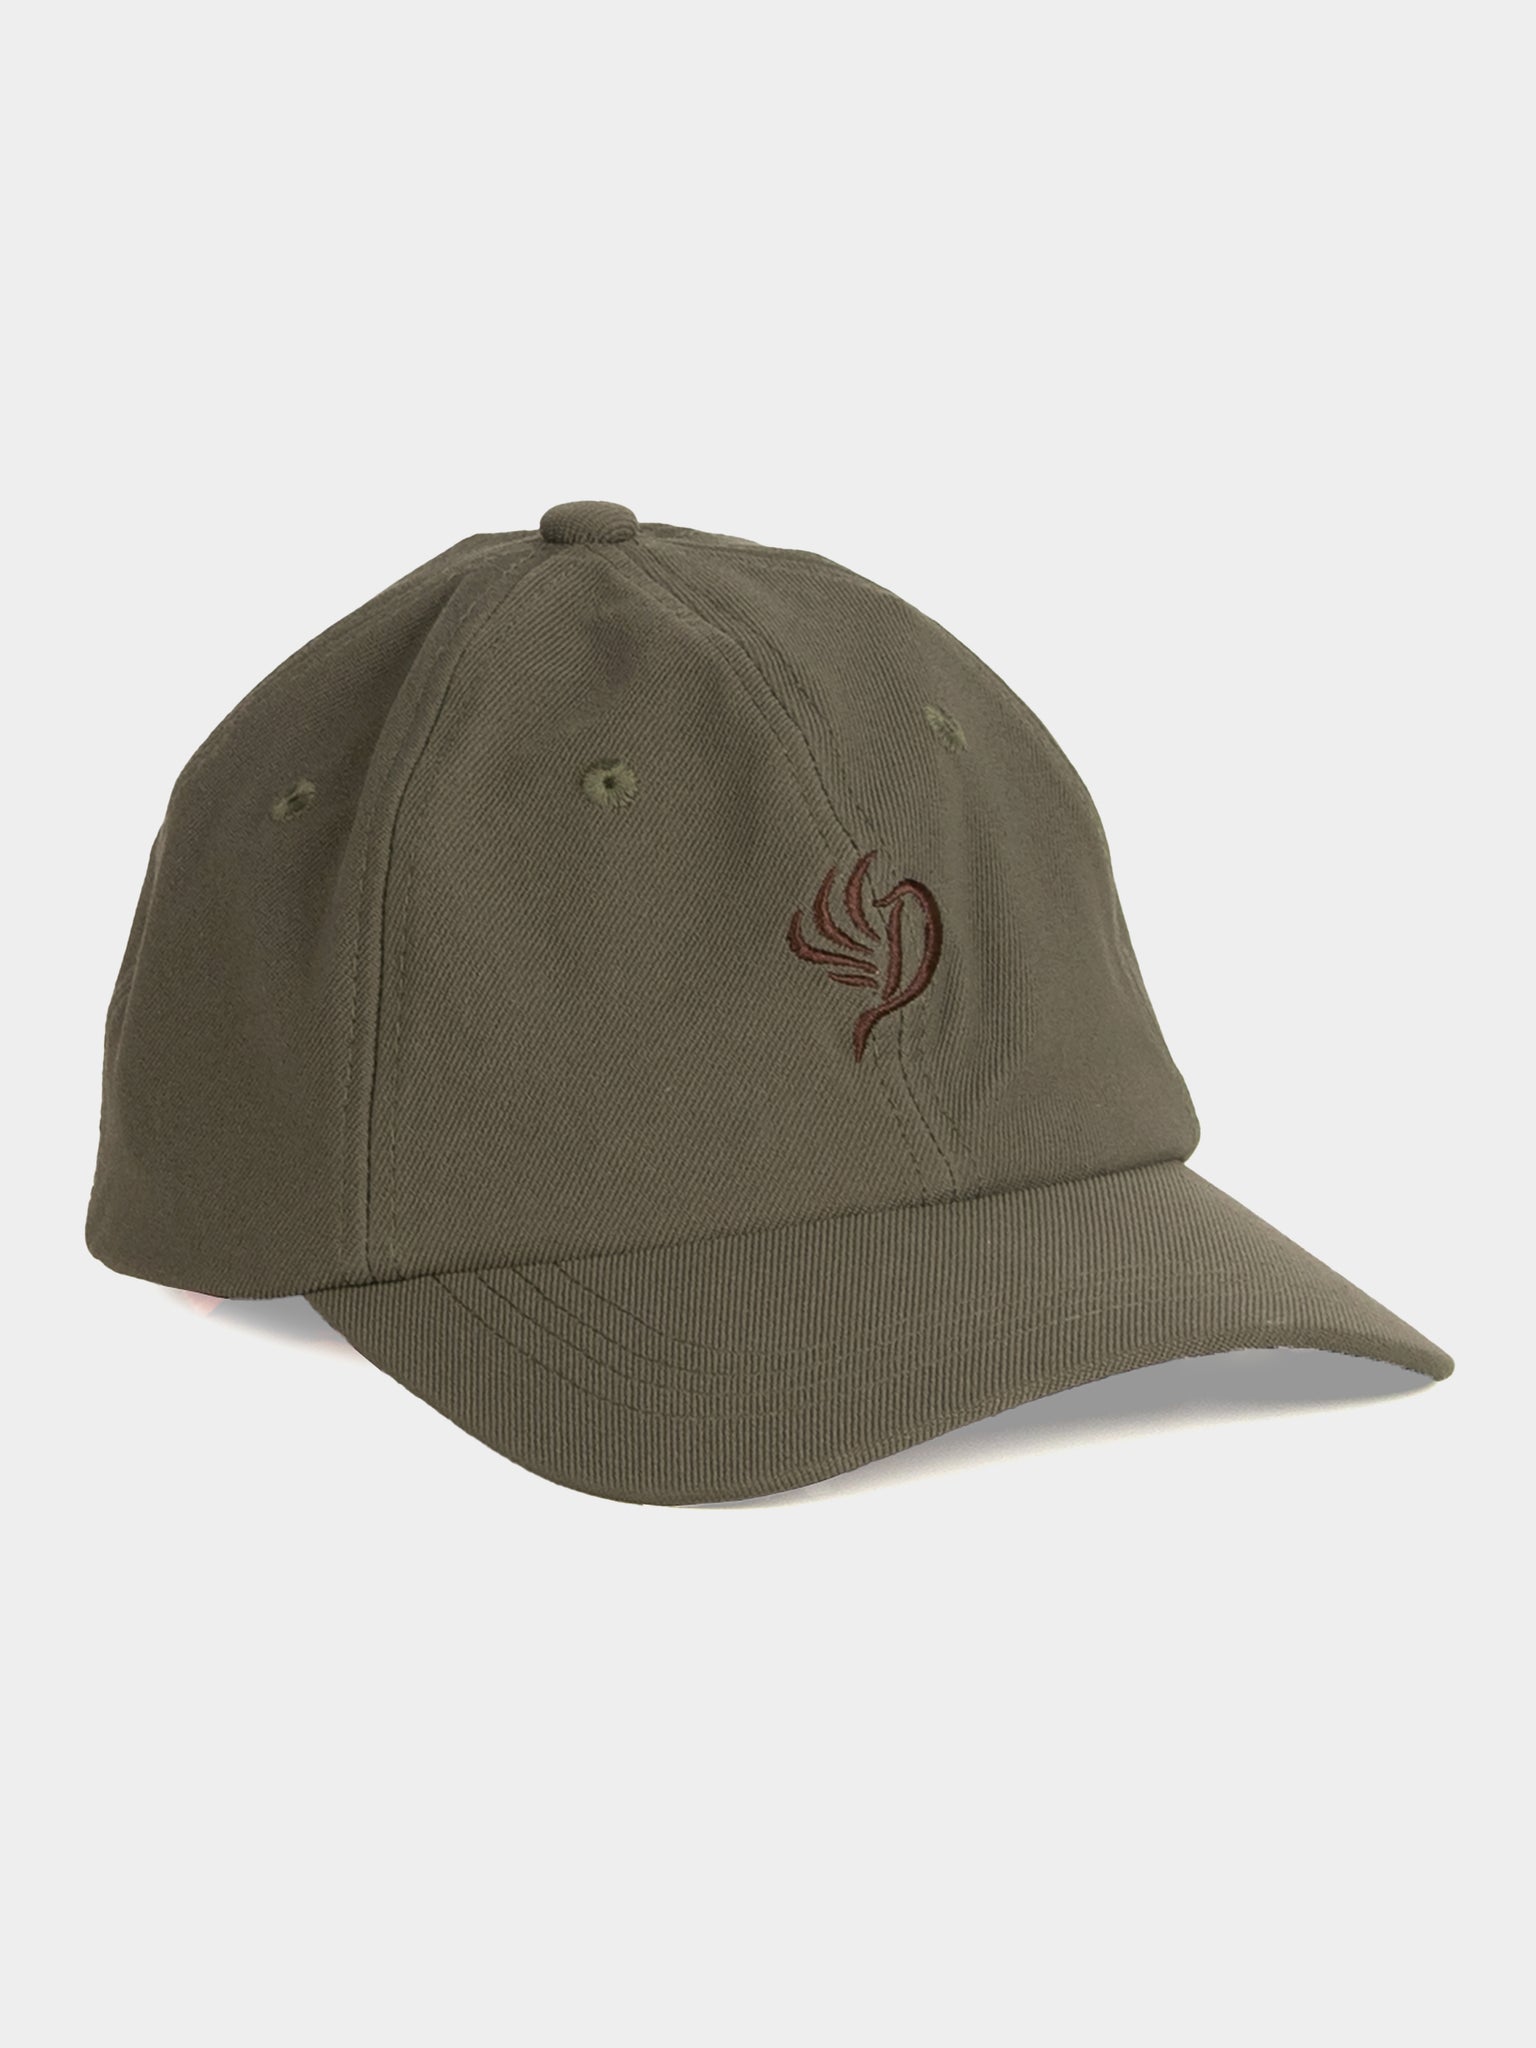 Duck Camp Crushable Flats Hat, Natural